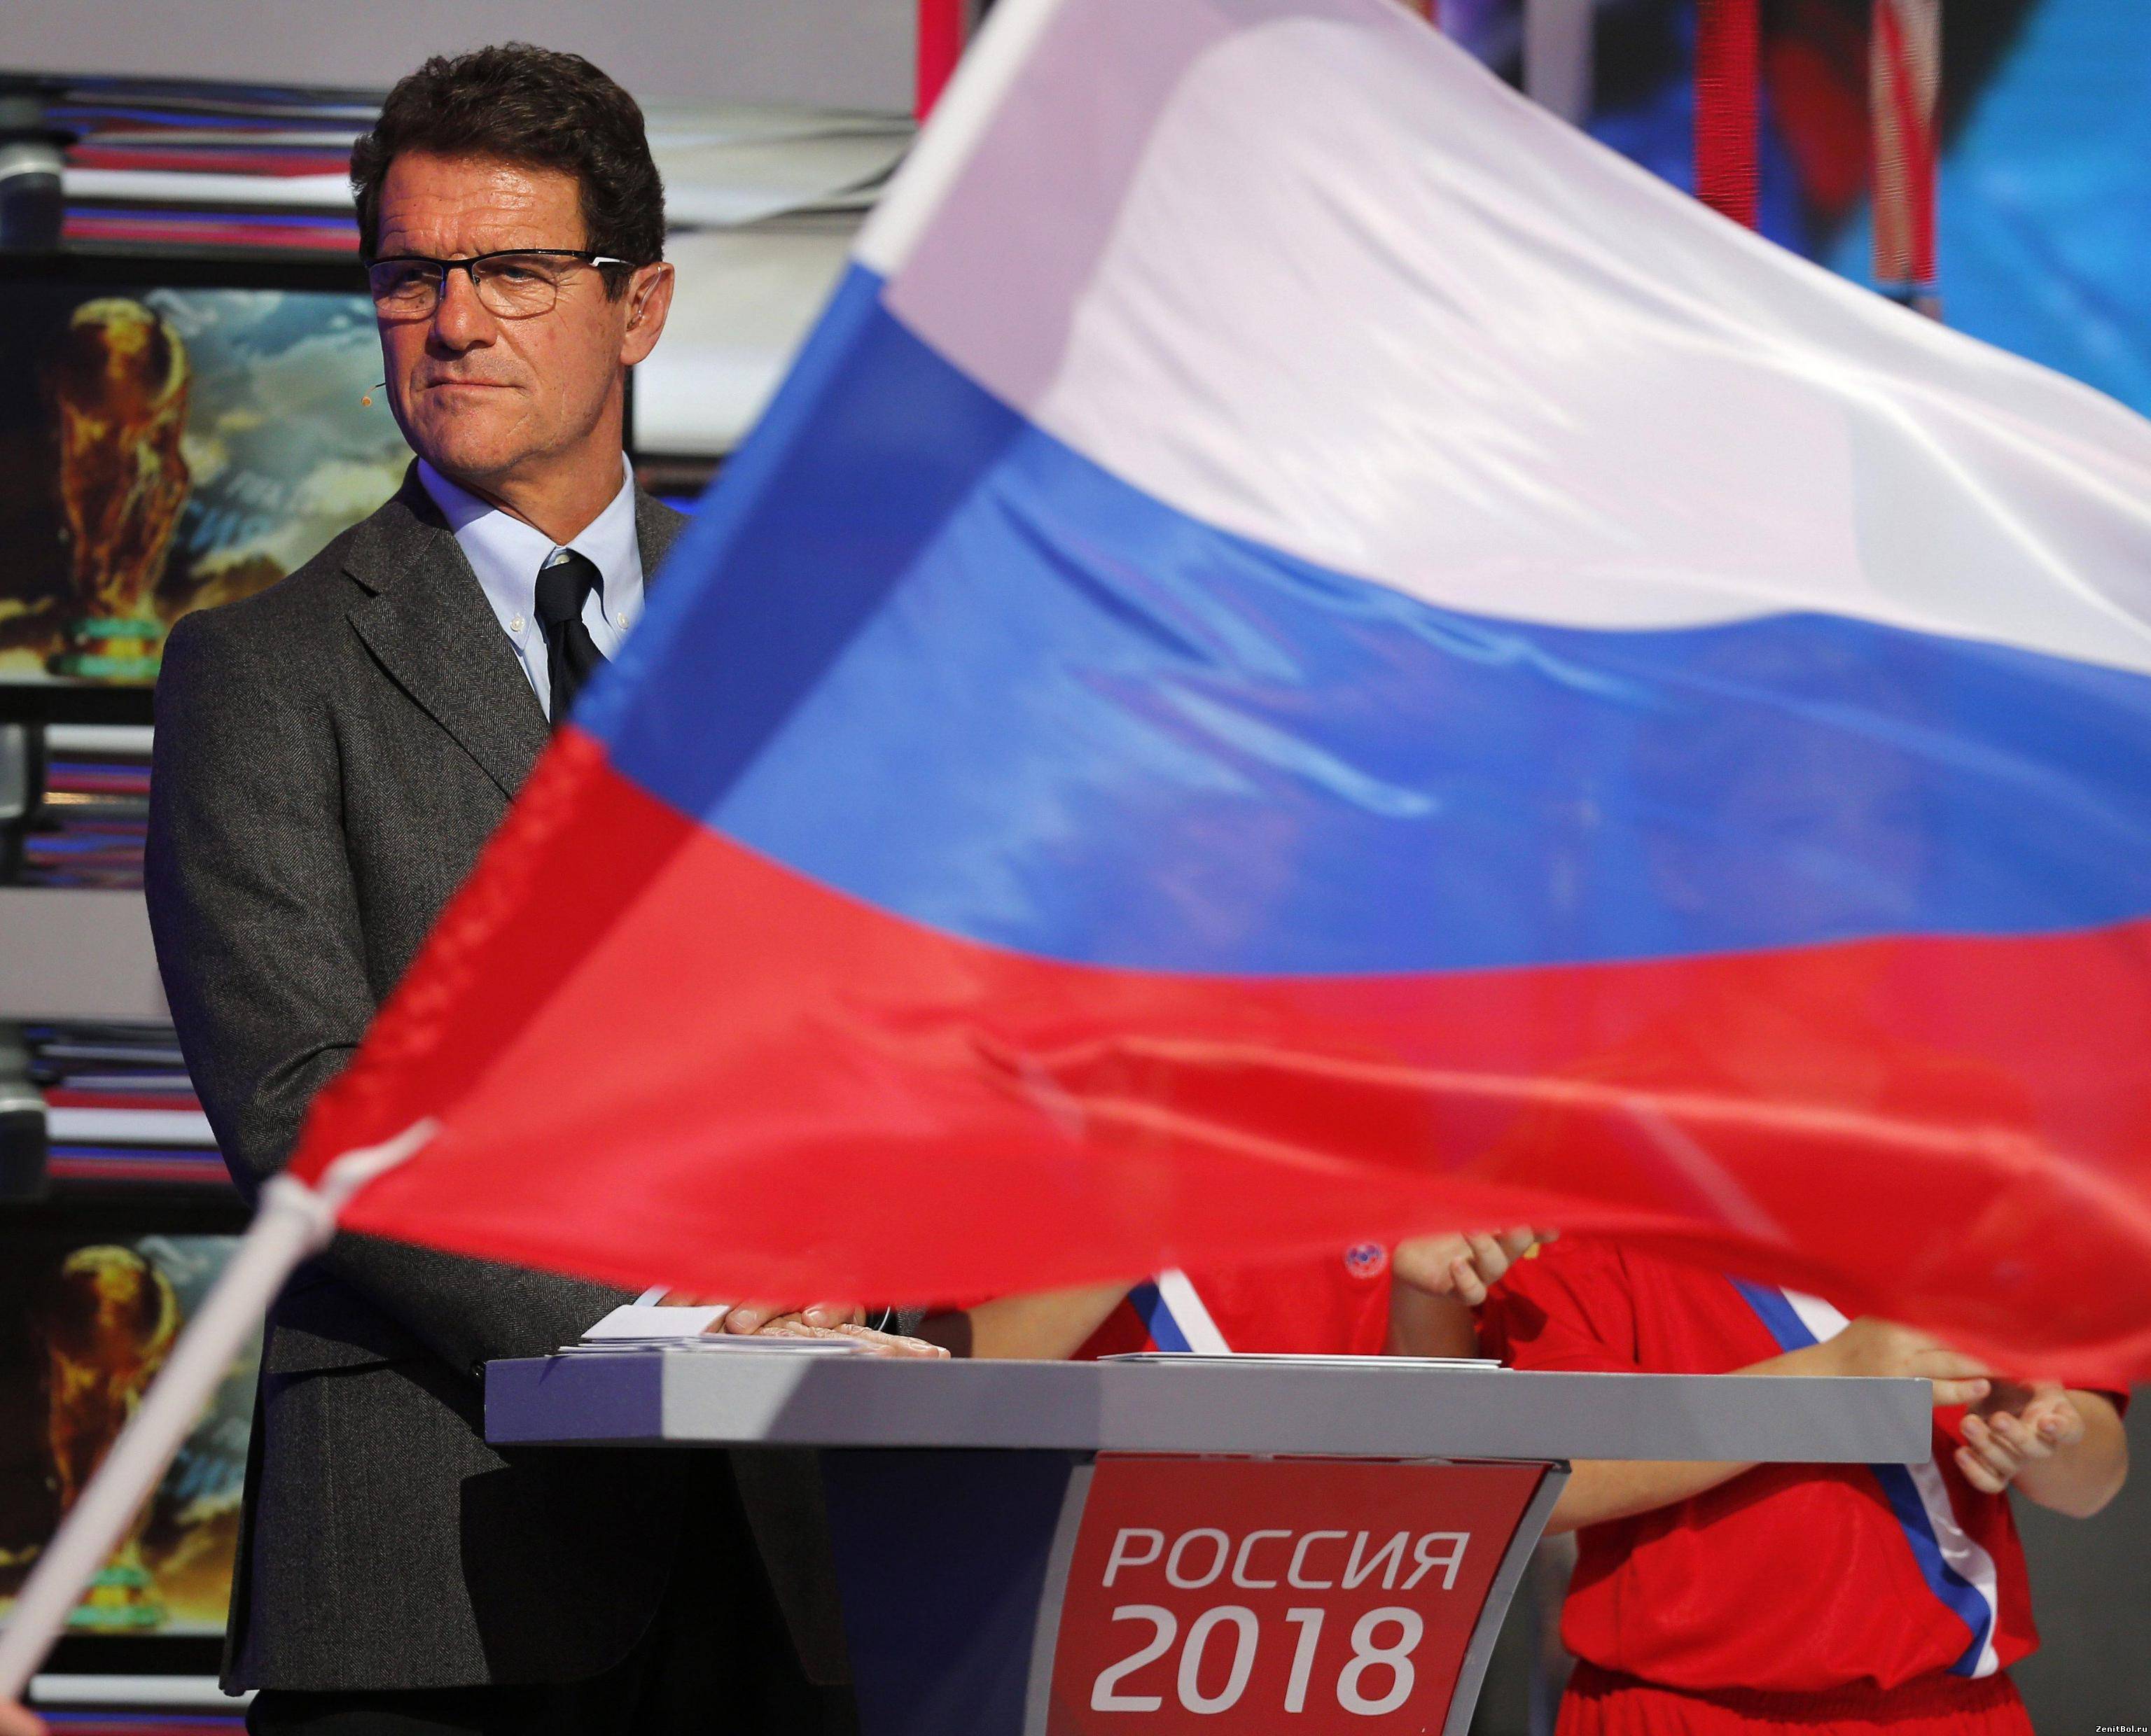 Russia 2018 and her Doomed Four-Year World Cup Plan